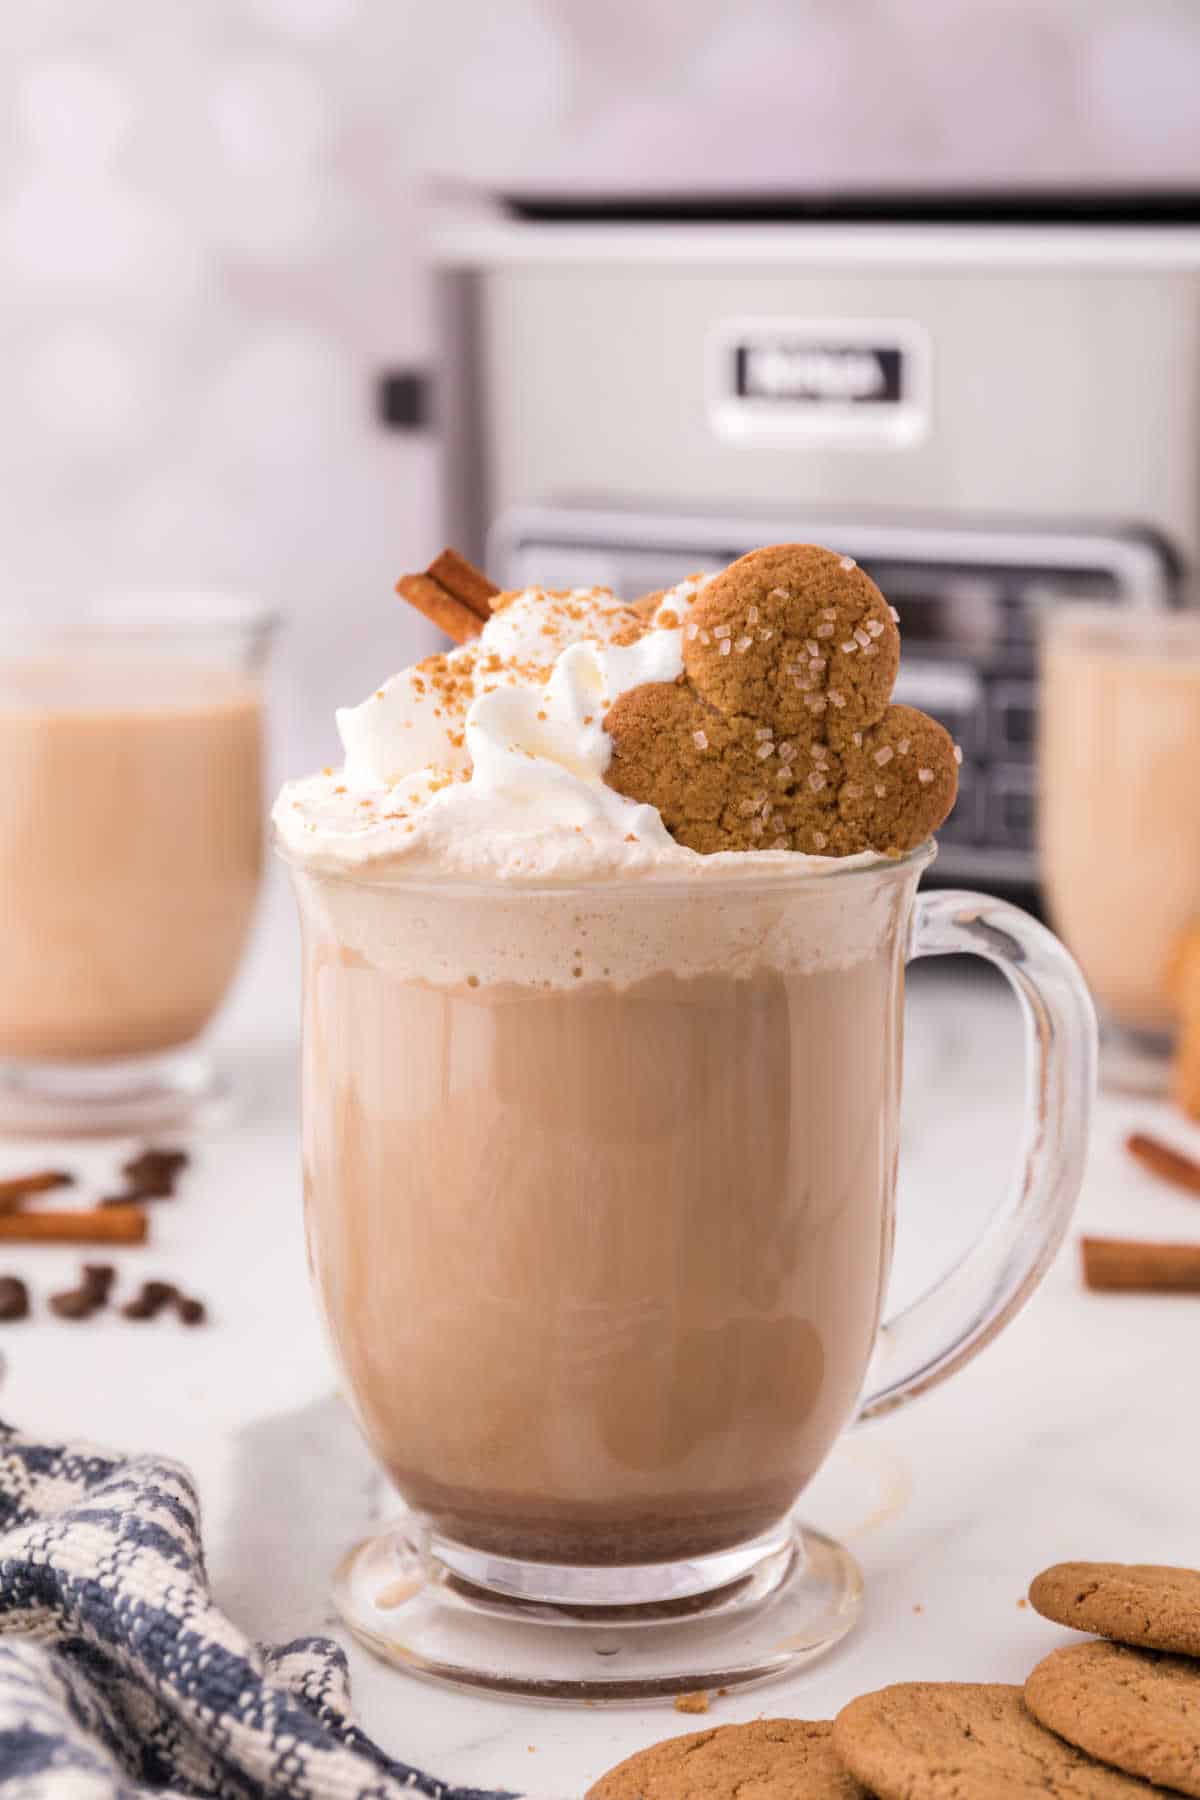 Gingerbread latte with whipped cream on top and a cookie.